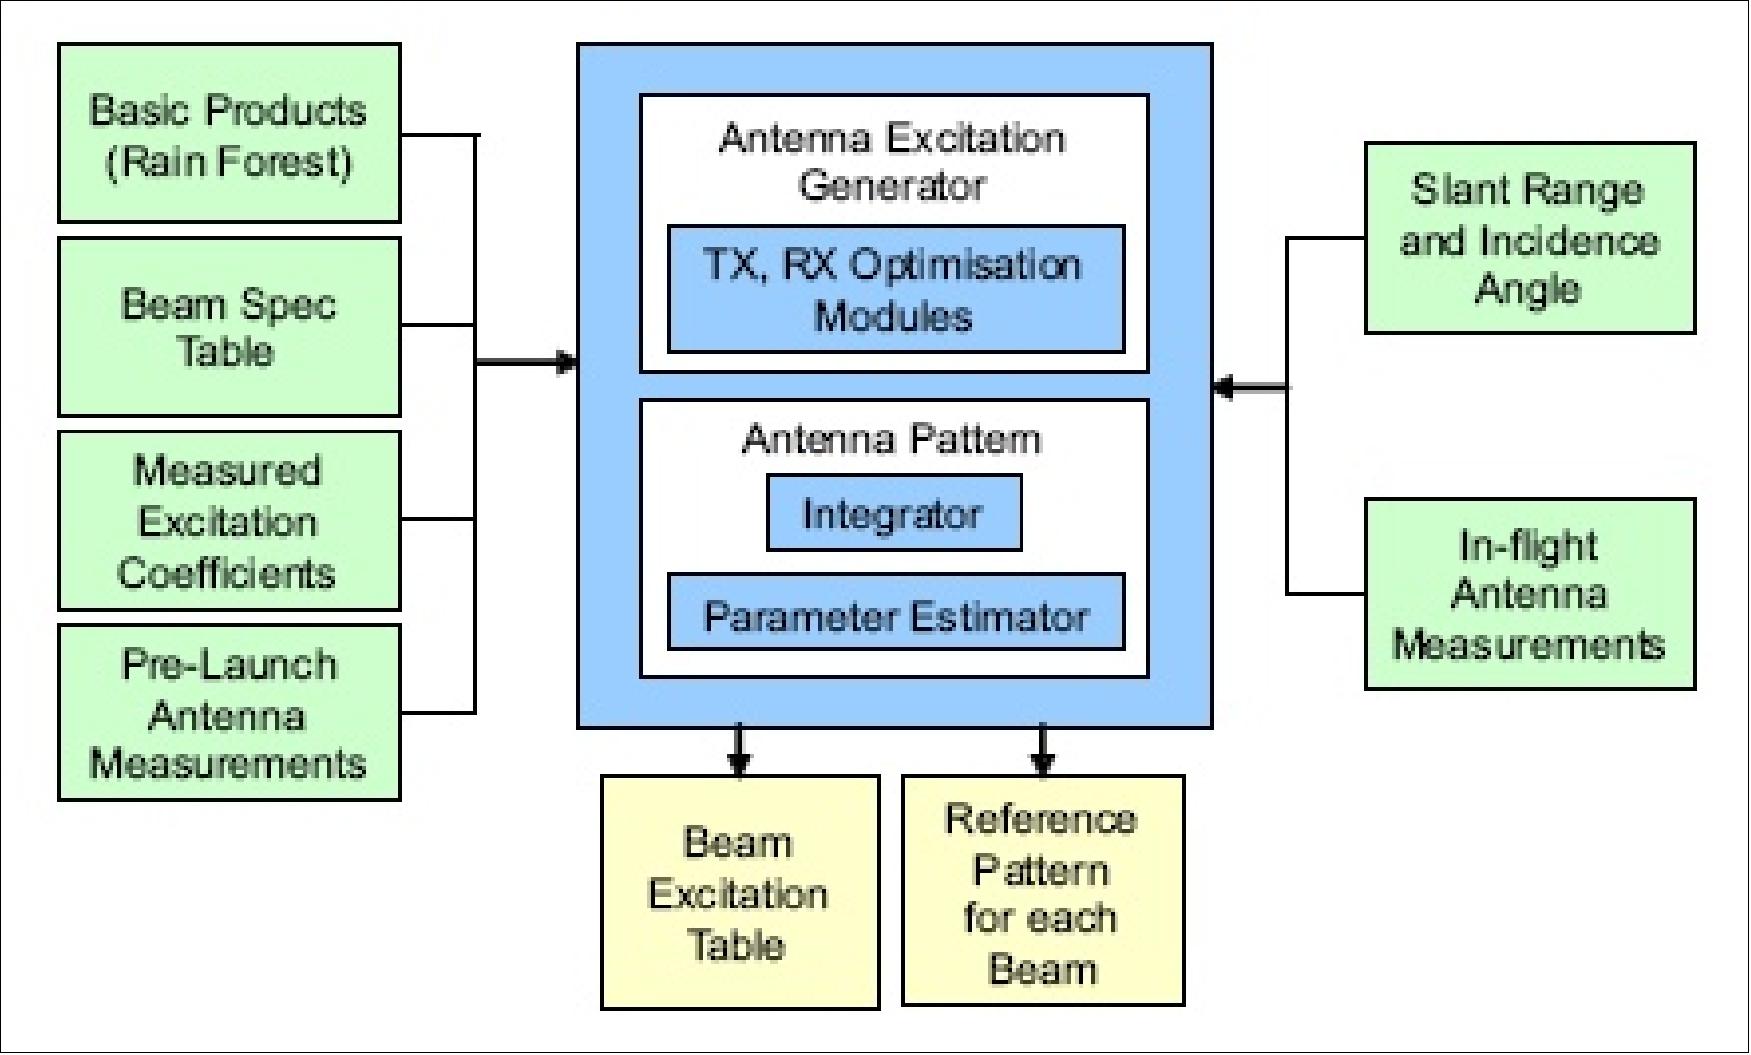 Figure 61: Block diagram of the antenna pattern subsystem (image credit: DLR)